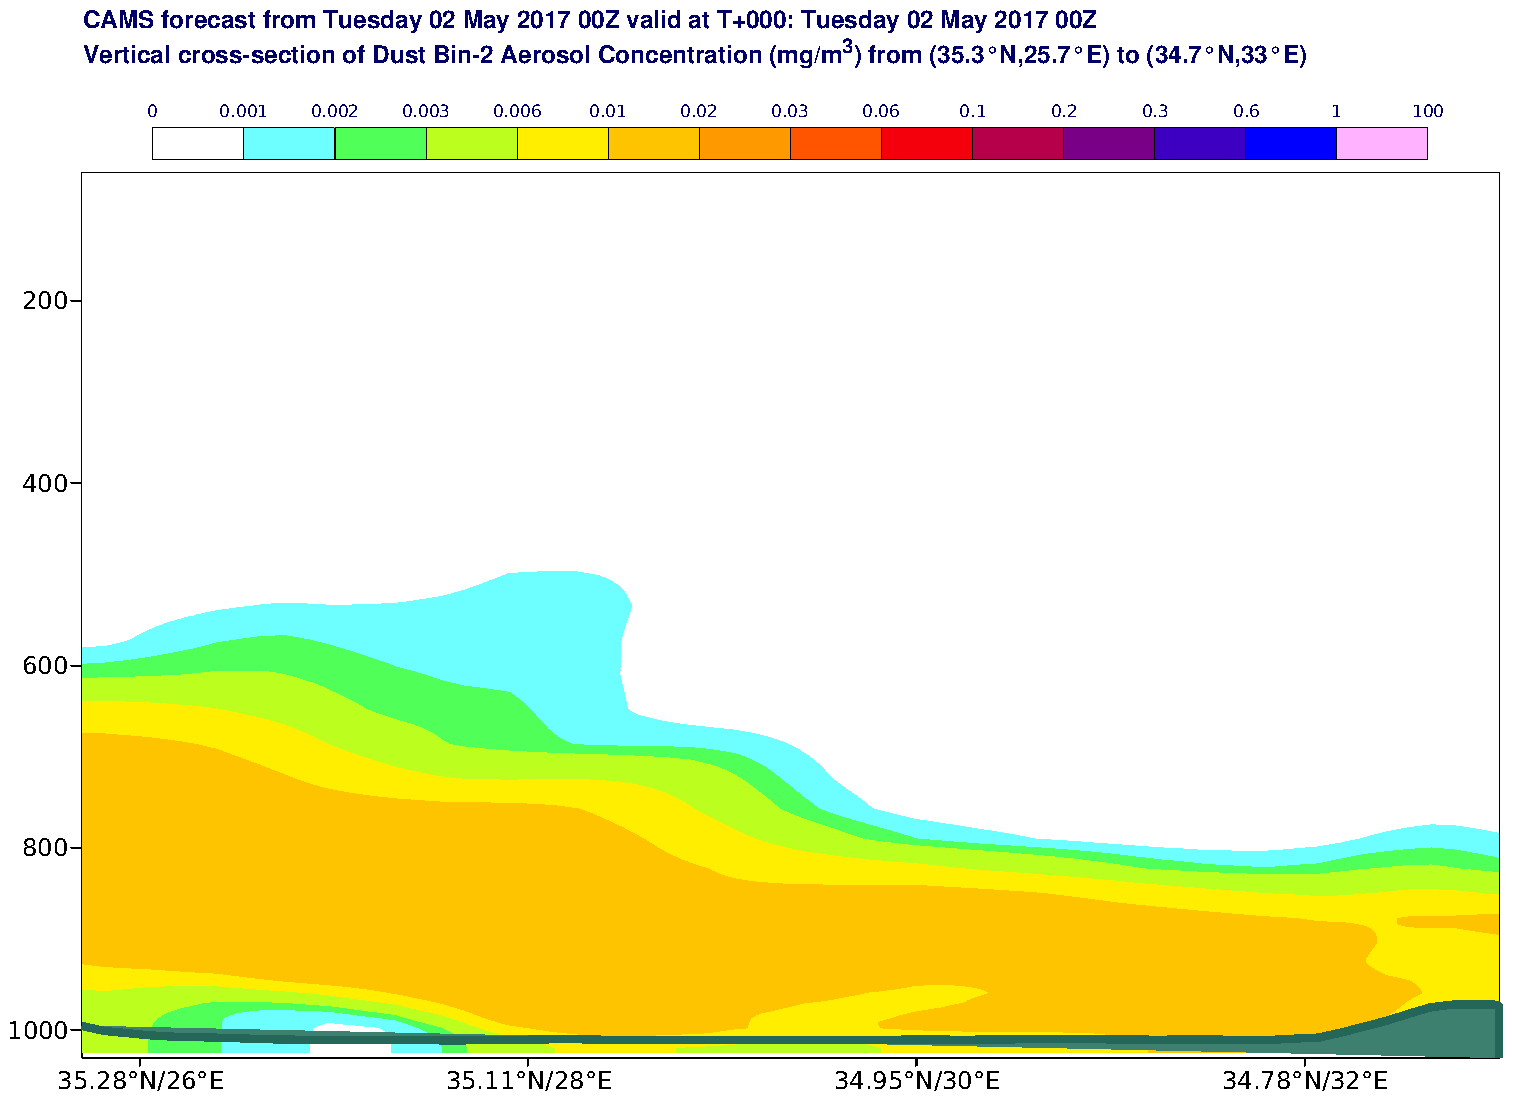 Vertical cross-section of Dust Bin-2 Aerosol Concentration (mg/m3) valid at T0 - 2017-05-02 00:00